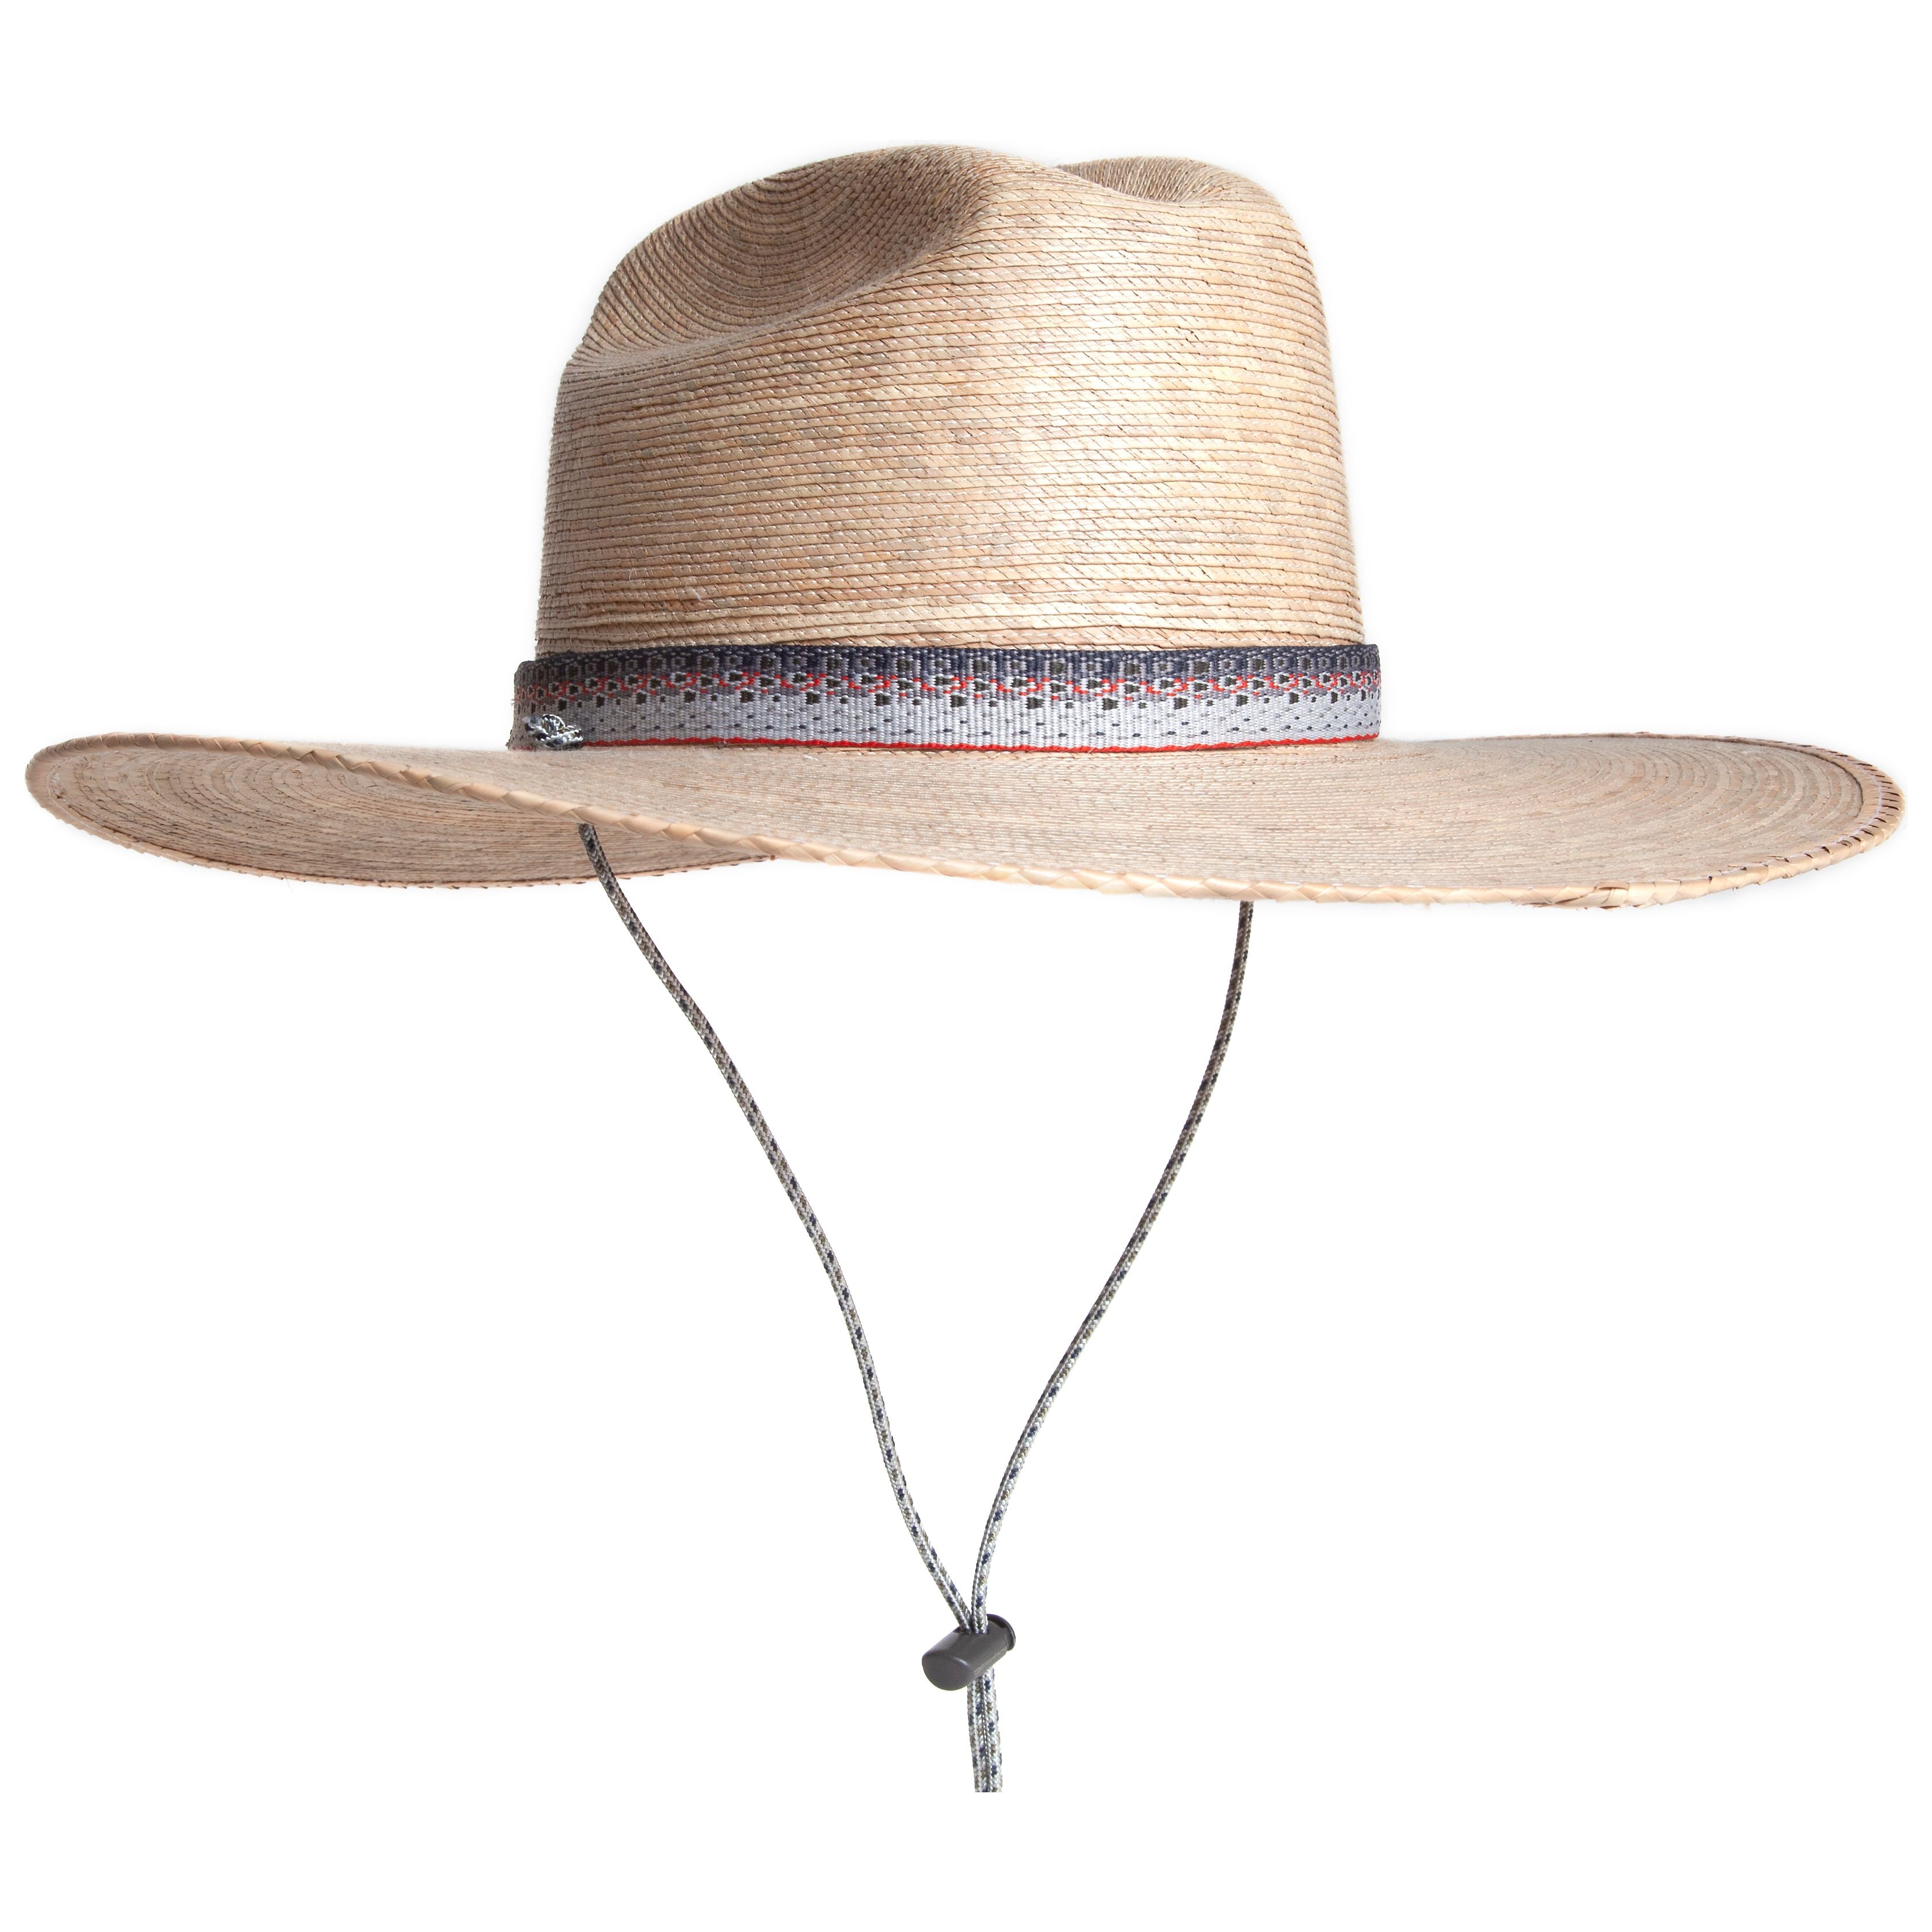 Fishpond Lowcountry Hat Image 02